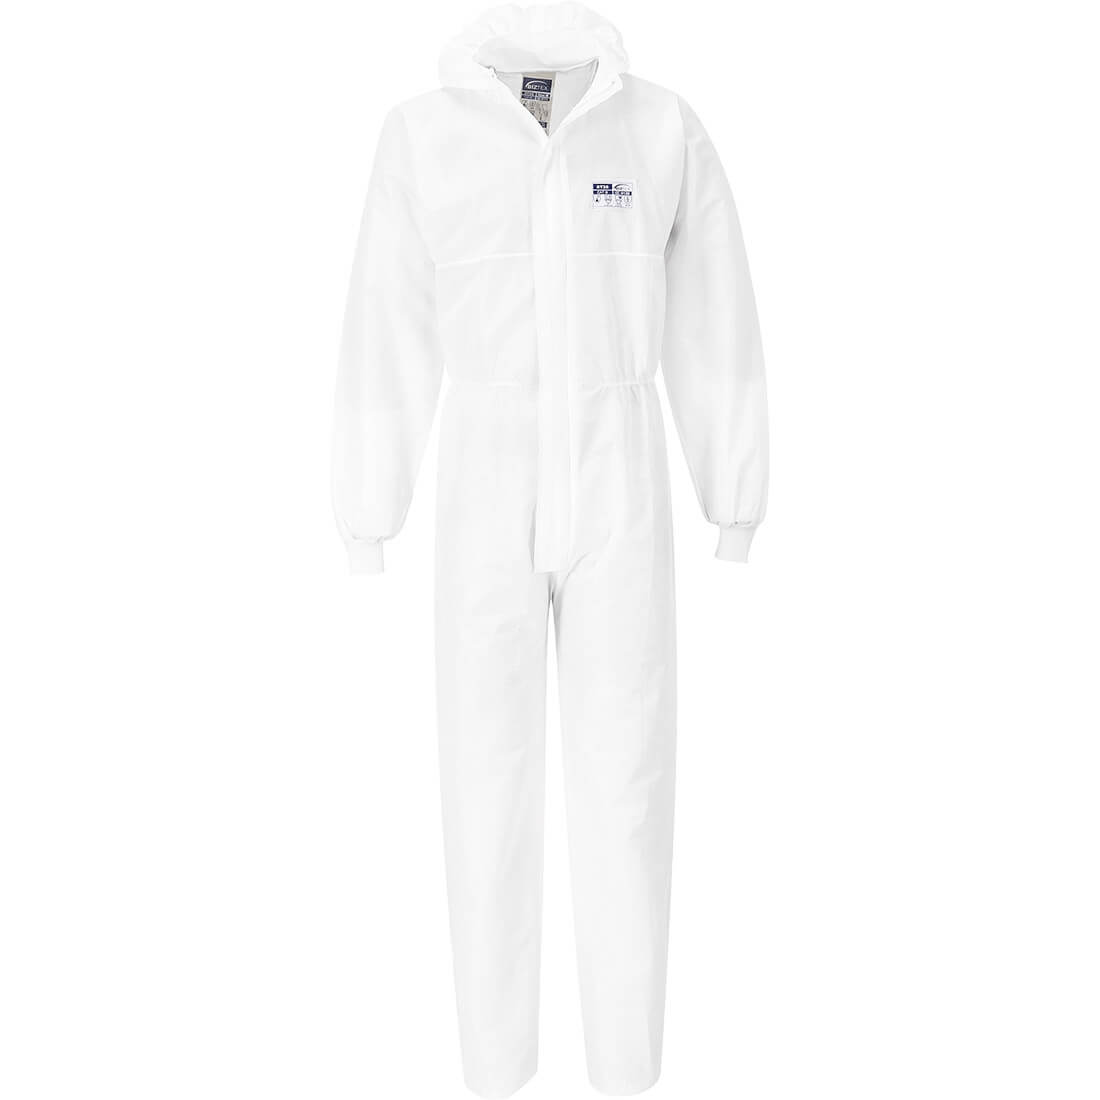 BizTex SMS Coverall With Knitted Cuff Type 5/6 - Personal protection